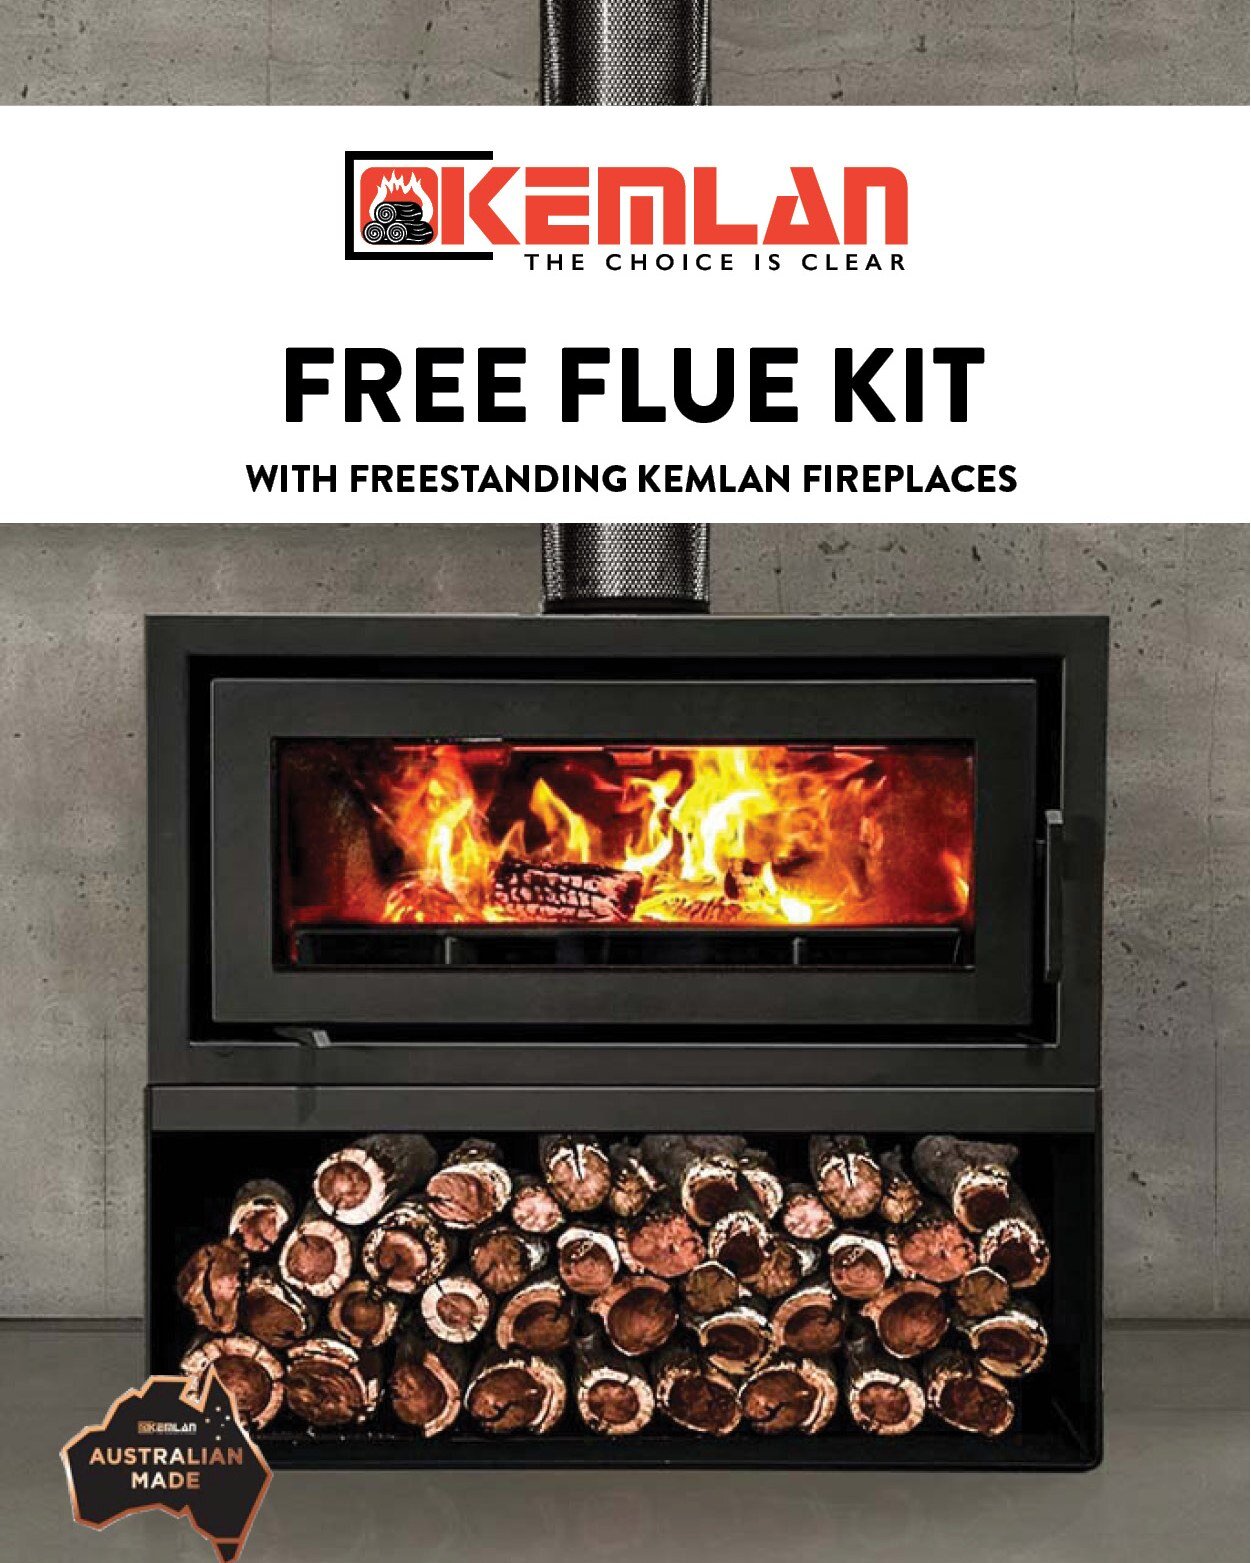 FREE FLUE WITH FREESTANDING KEMLAN FIREPLACES

String &amp; Salt Kitchen are your local Kemlan specialist and are West Gippsland's only independently owned appliance retailer. We offer a full service including free storage, free delivery and free rem